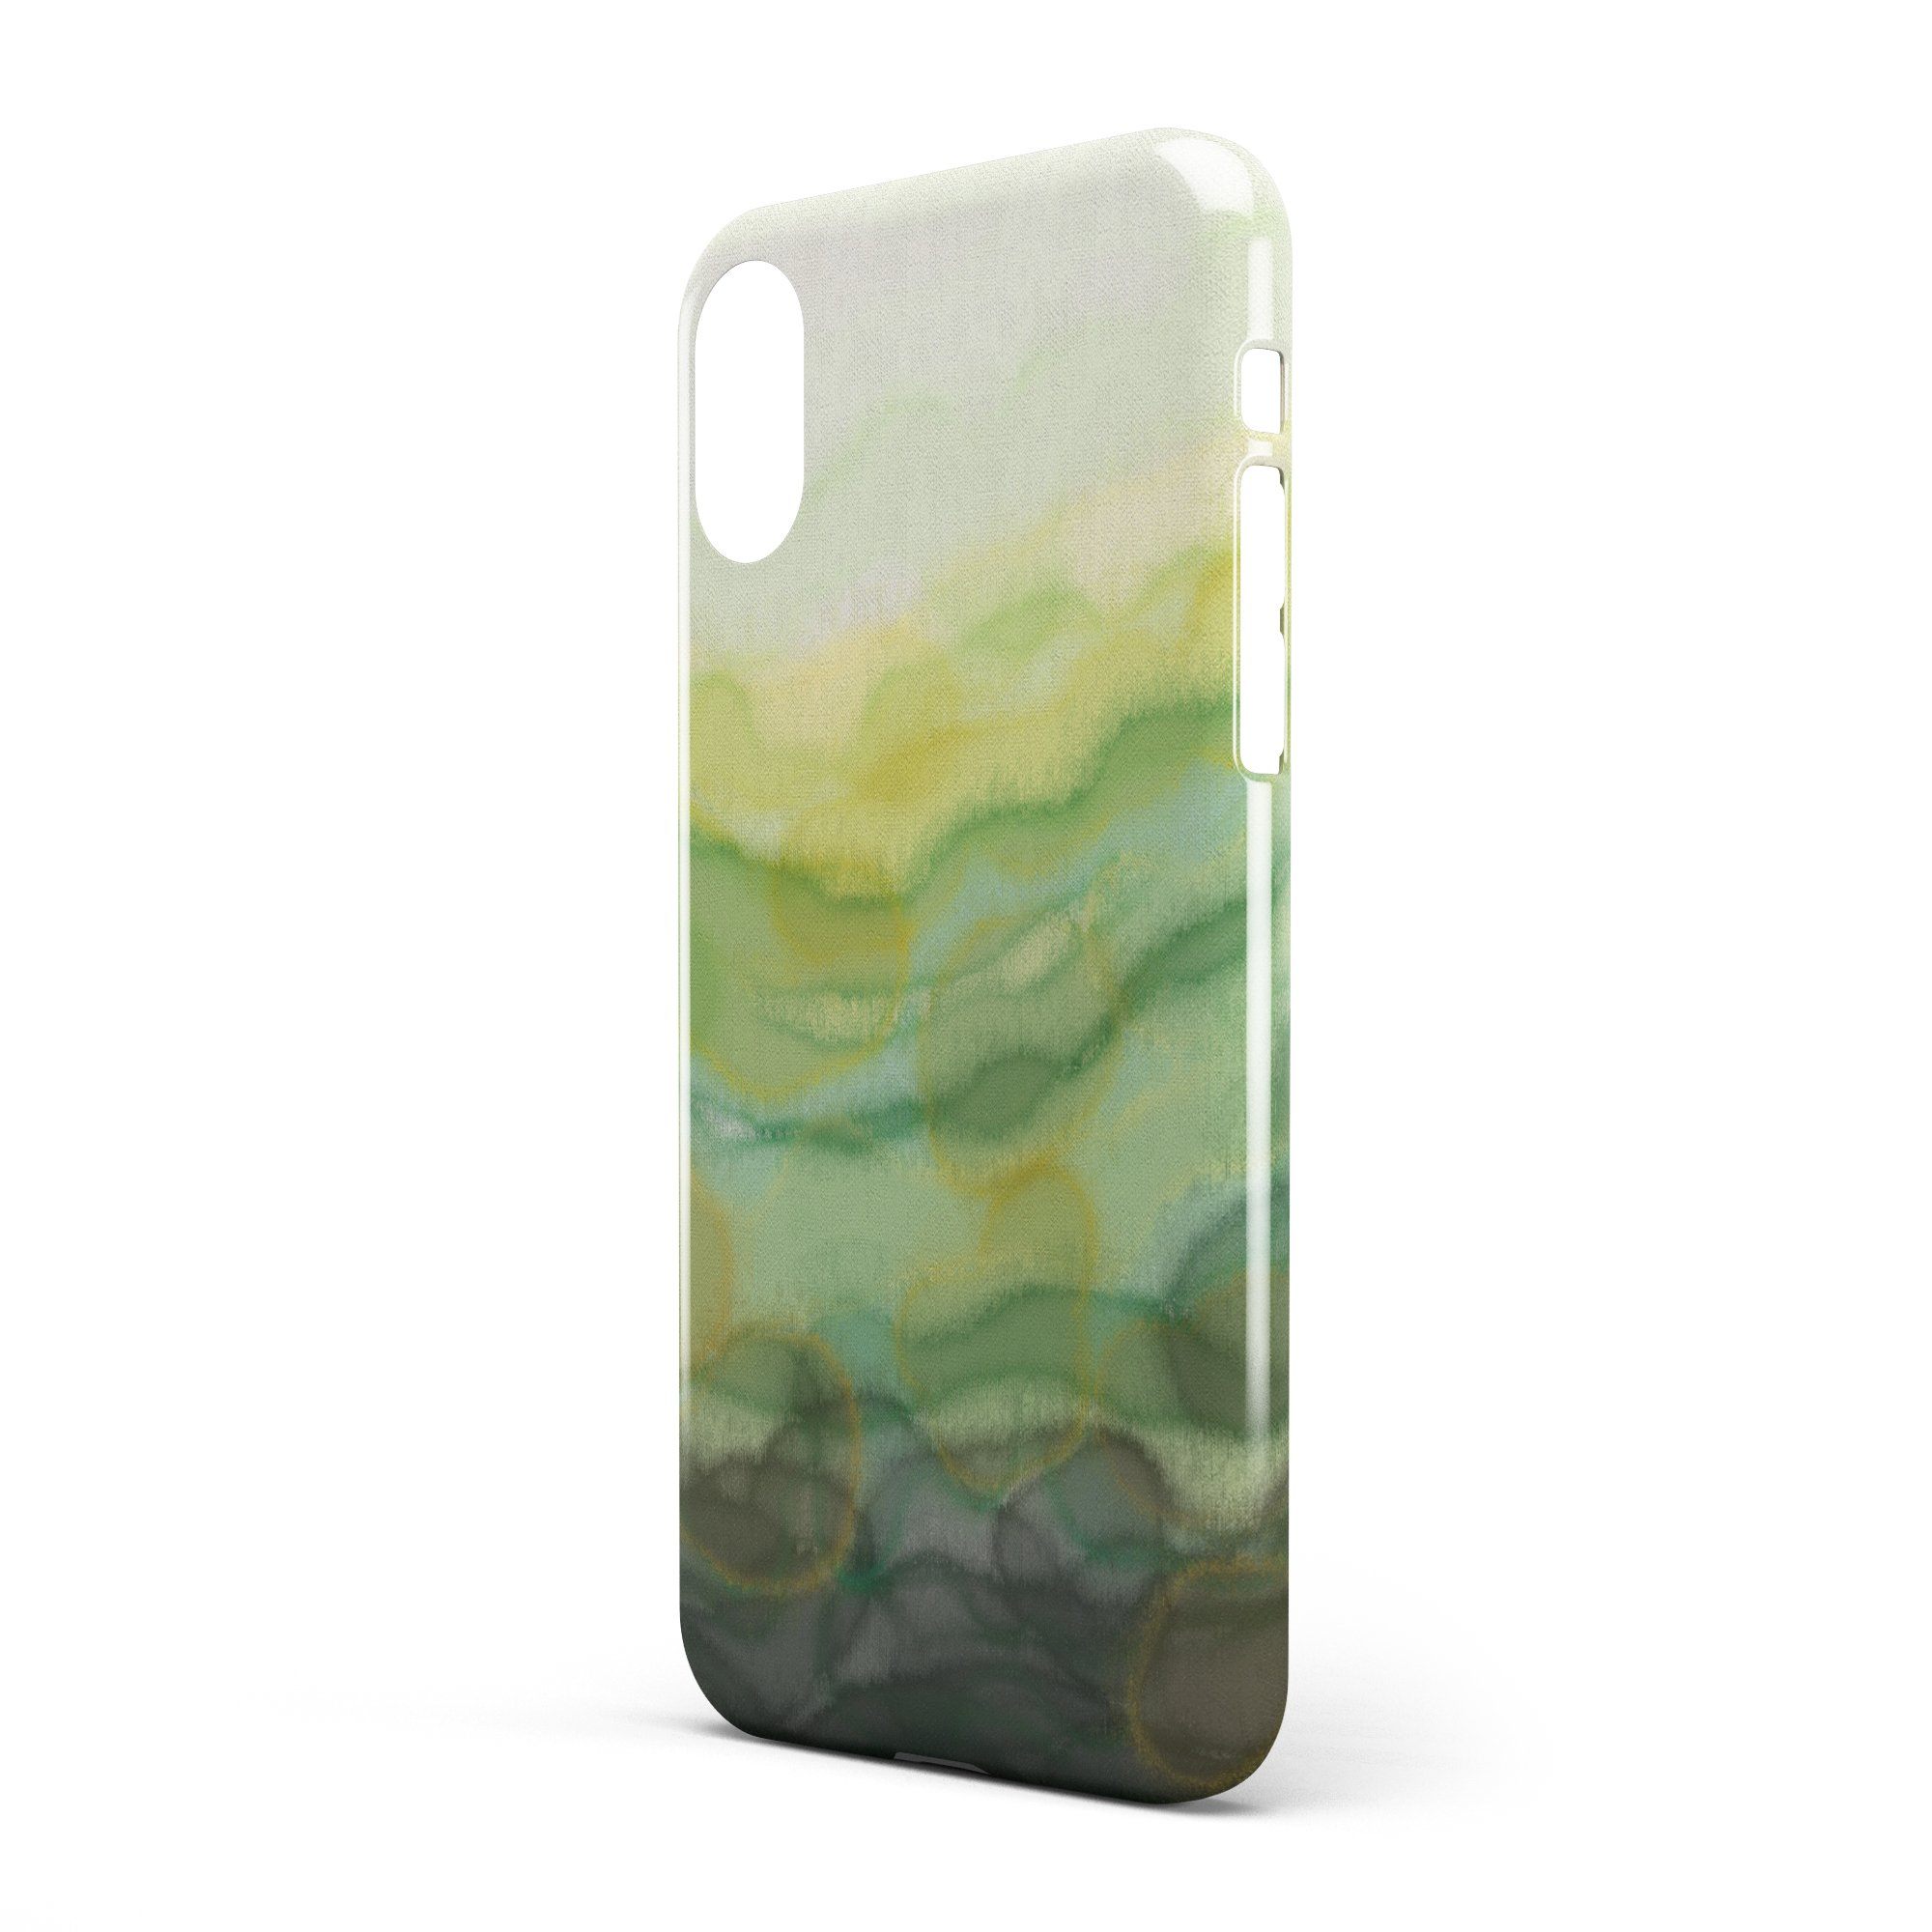 Serenity Green iPhone Case - Louise Mead